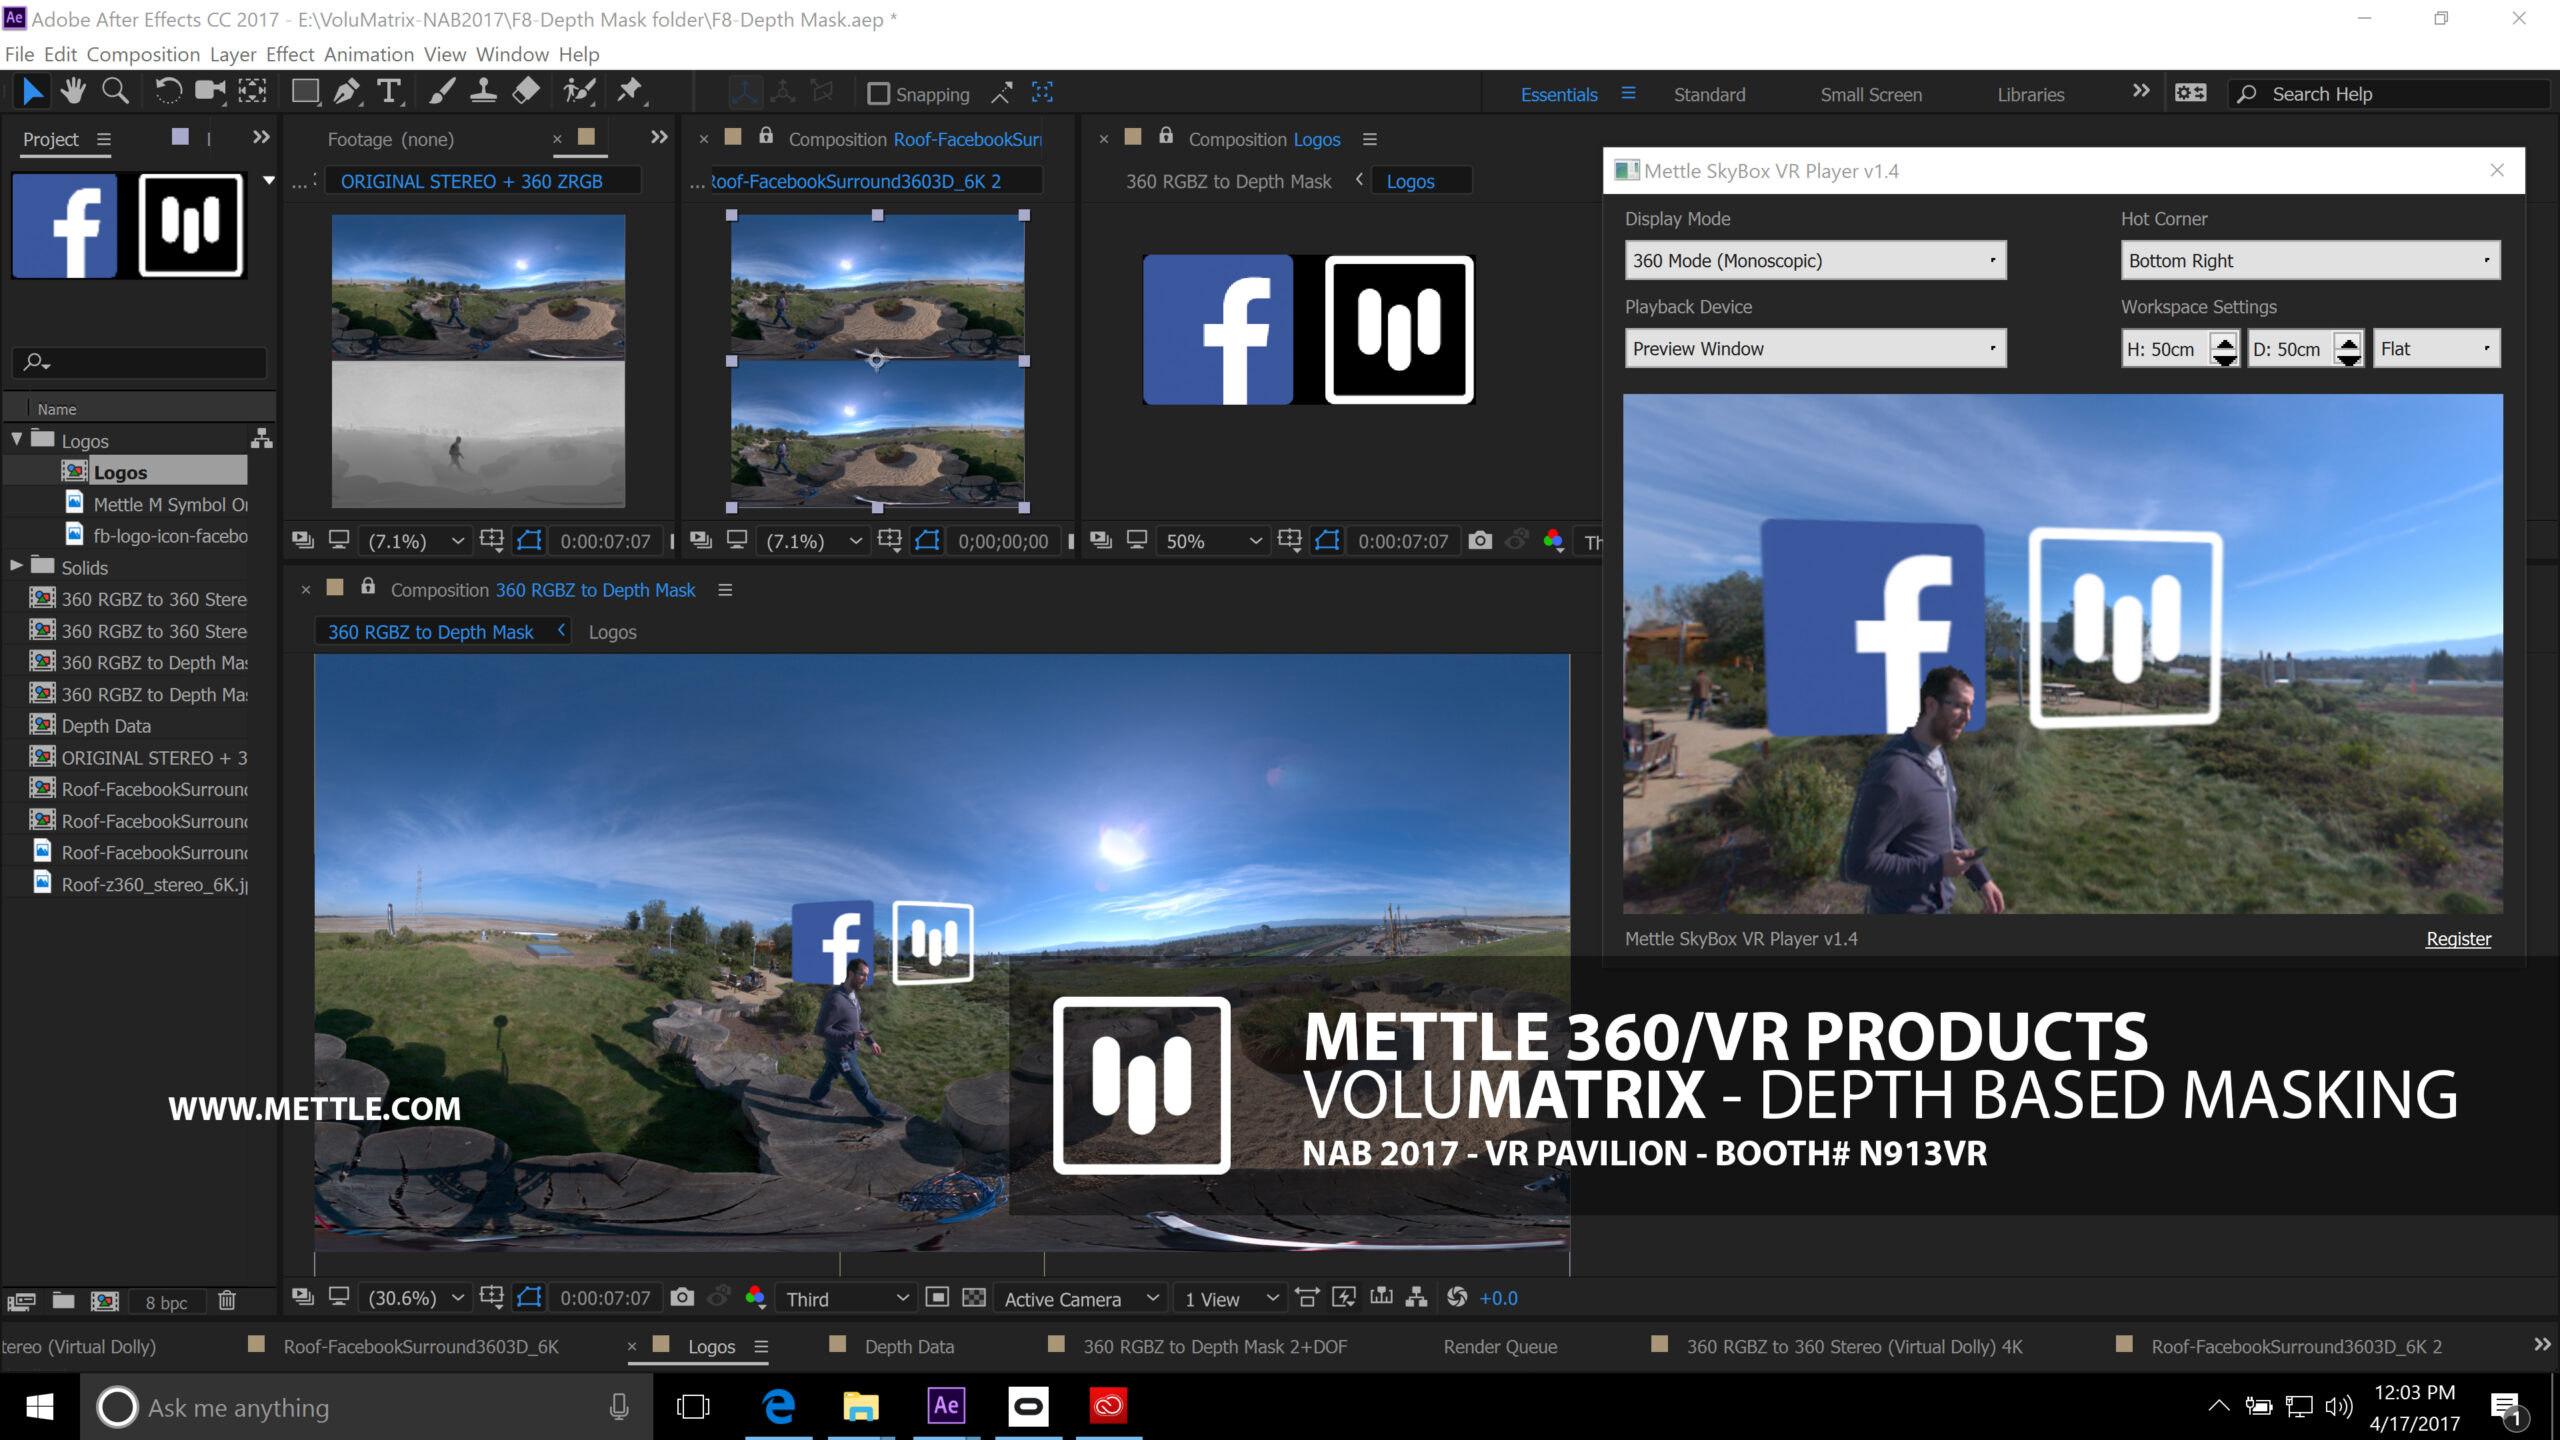 Facebook Collaborates with Mettle for 360° Depth Related VR FX Software |  Mettle